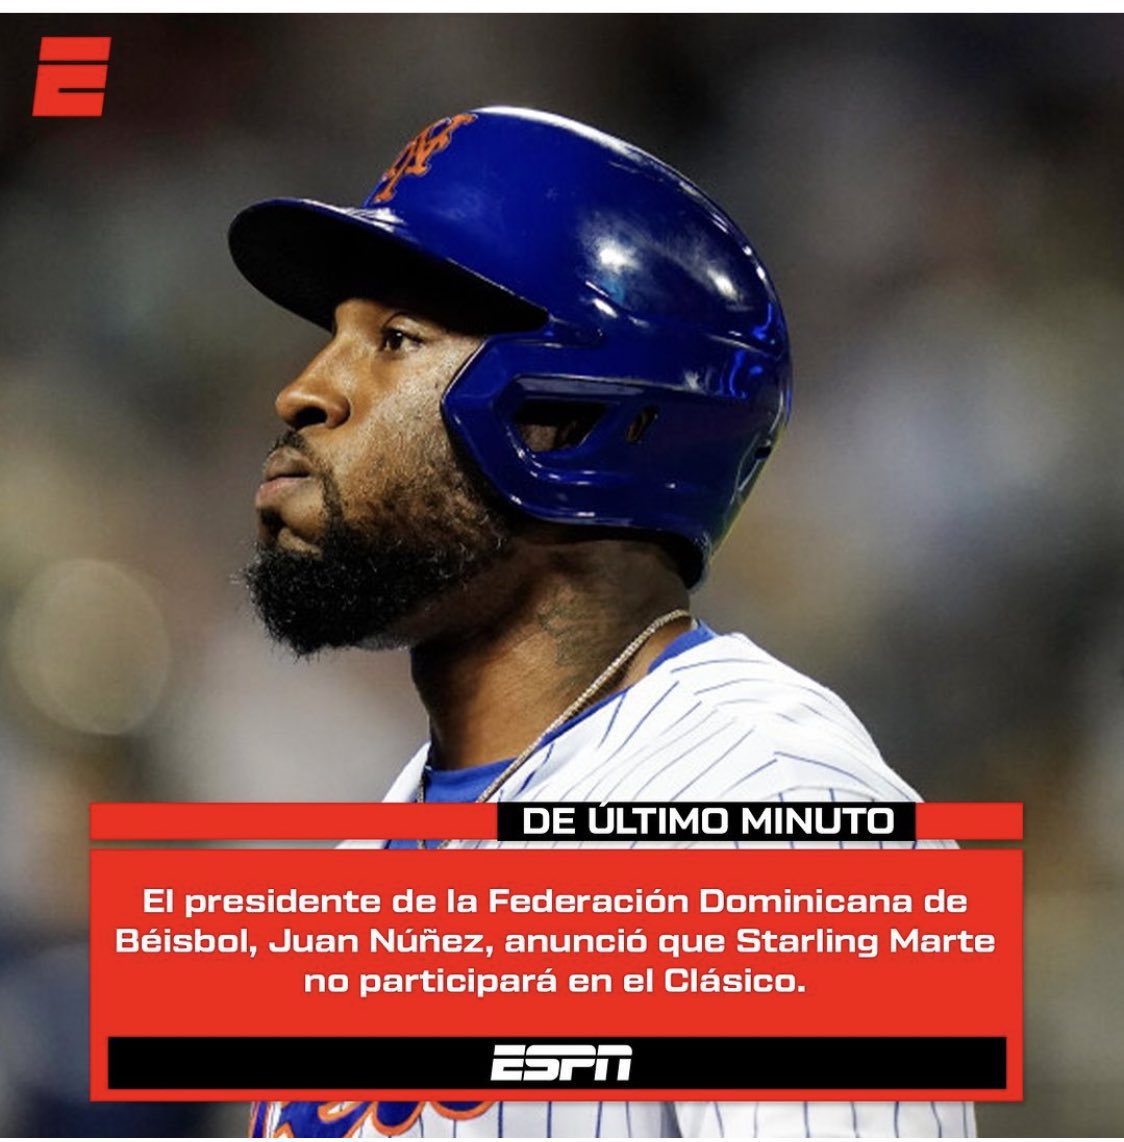 Starling Marte will not play with the Dominican WBC